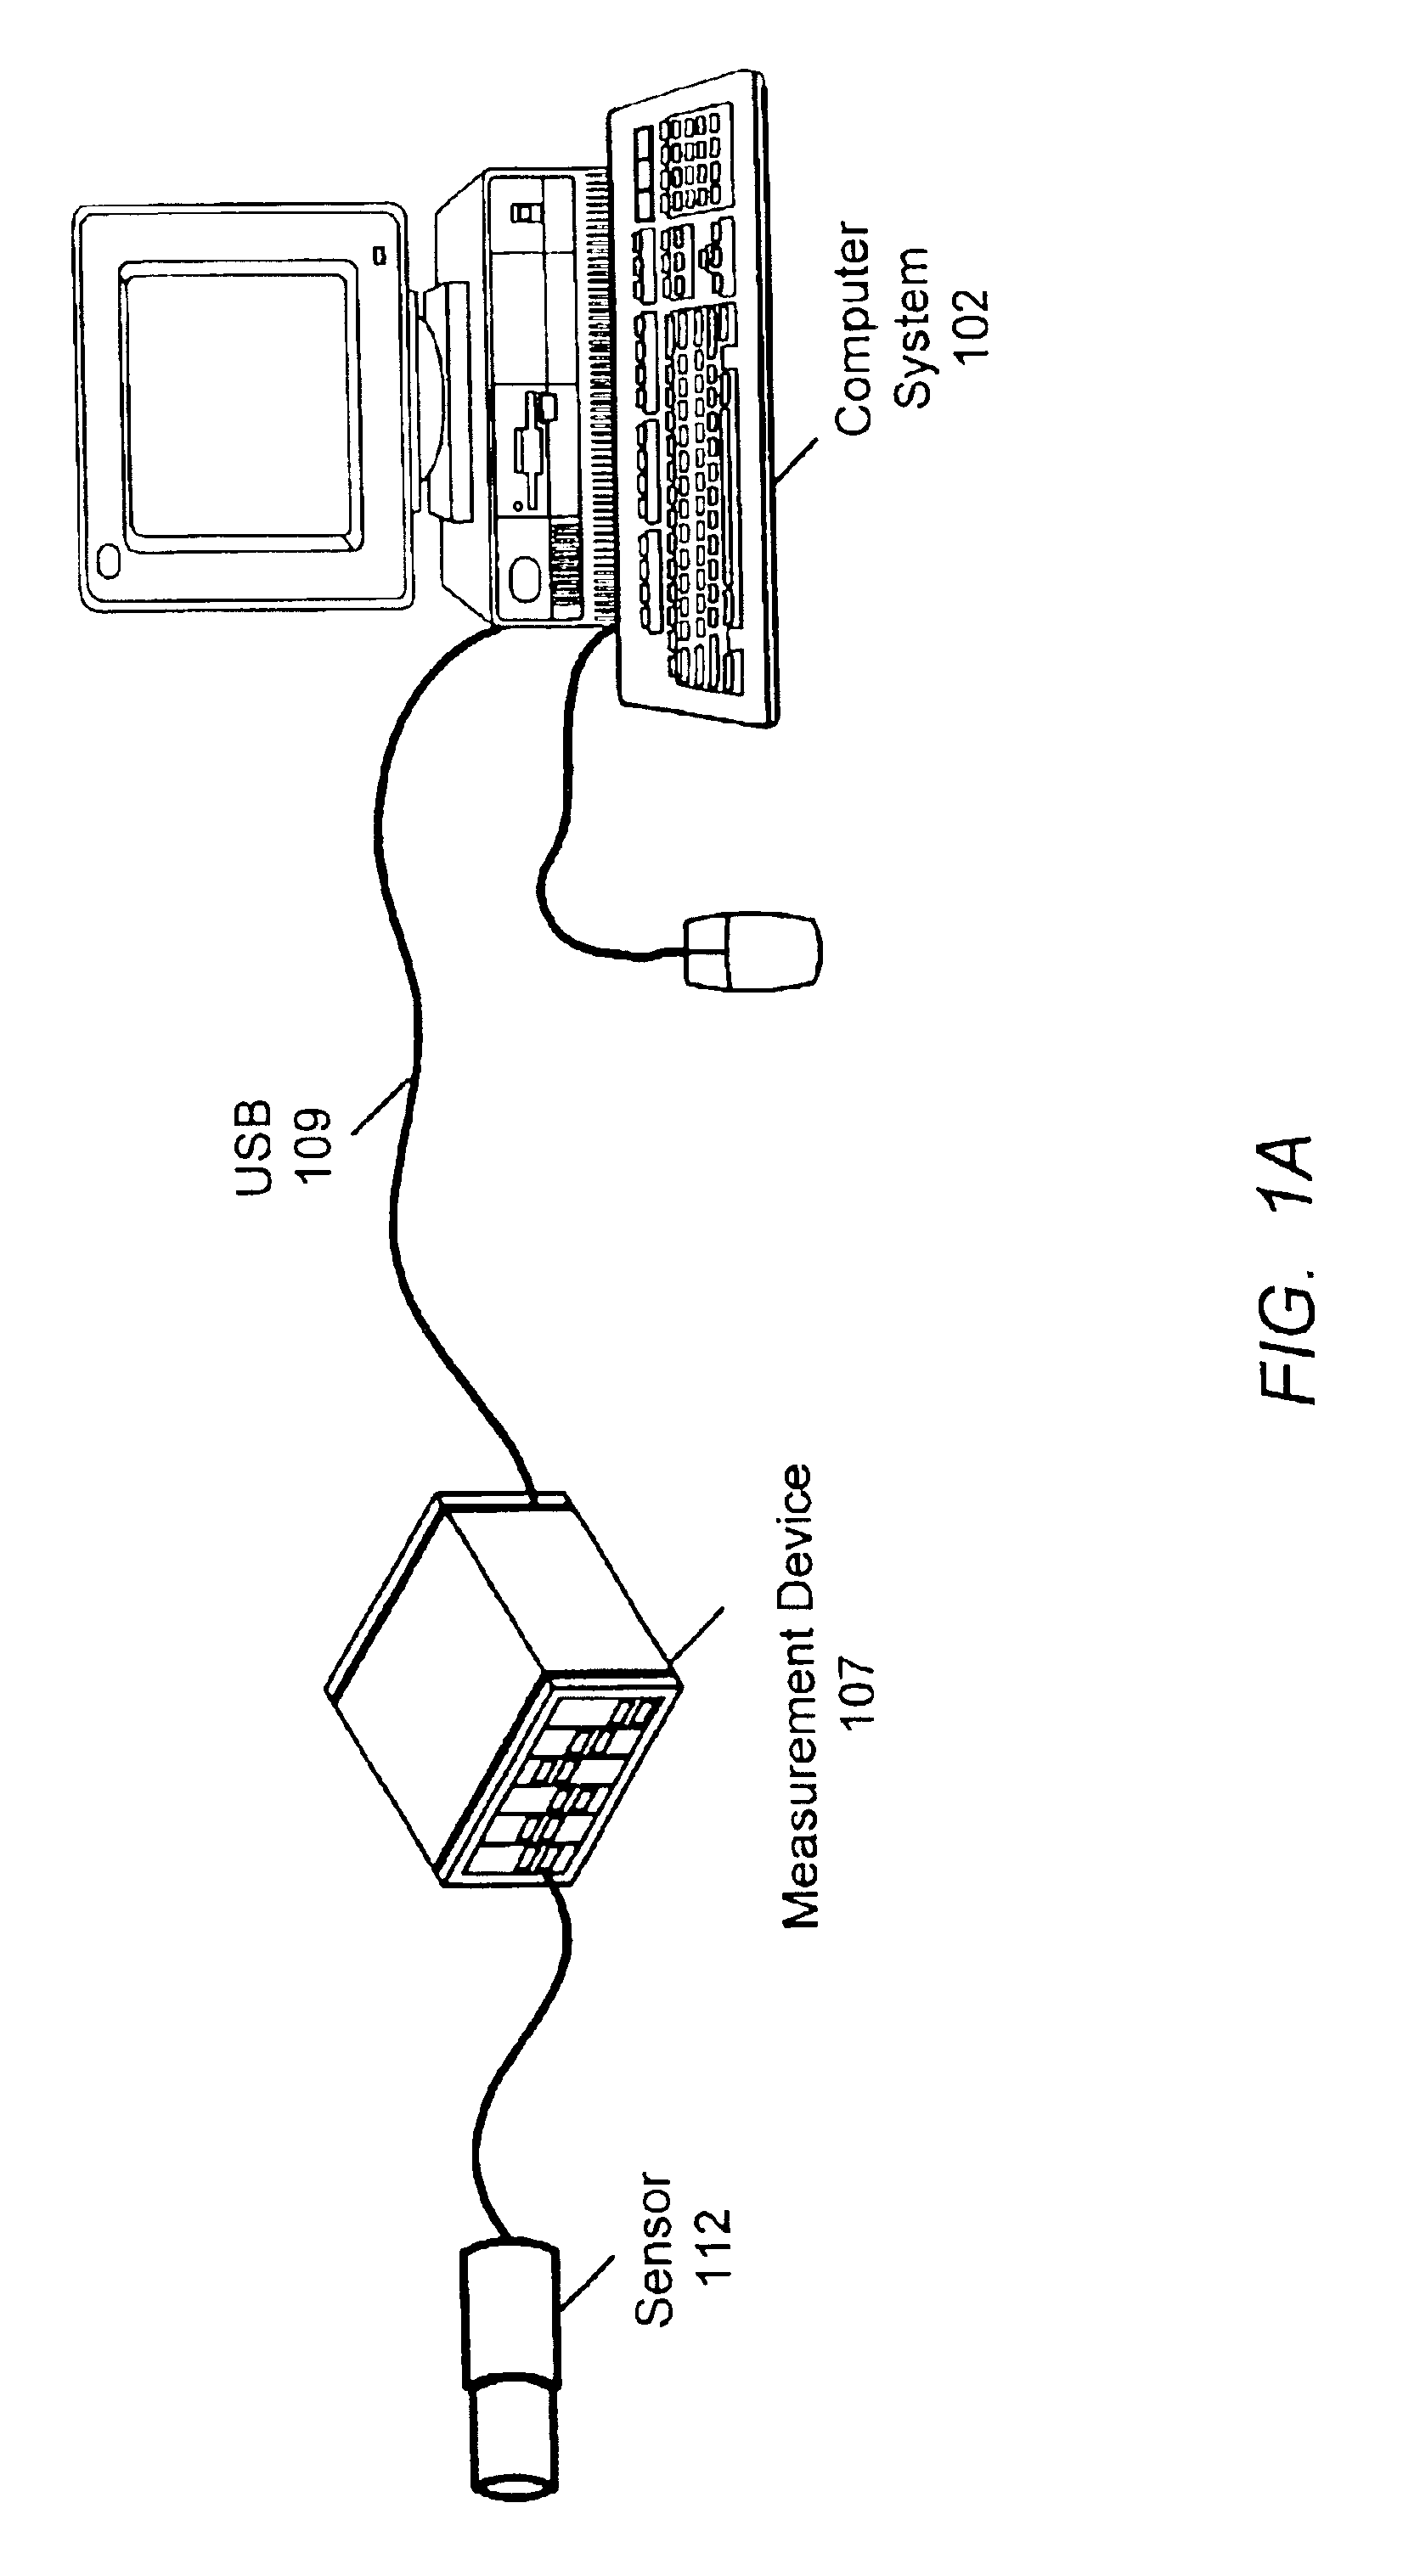 Measurement system including a programmable hardware element and measurement modules that convey interface information